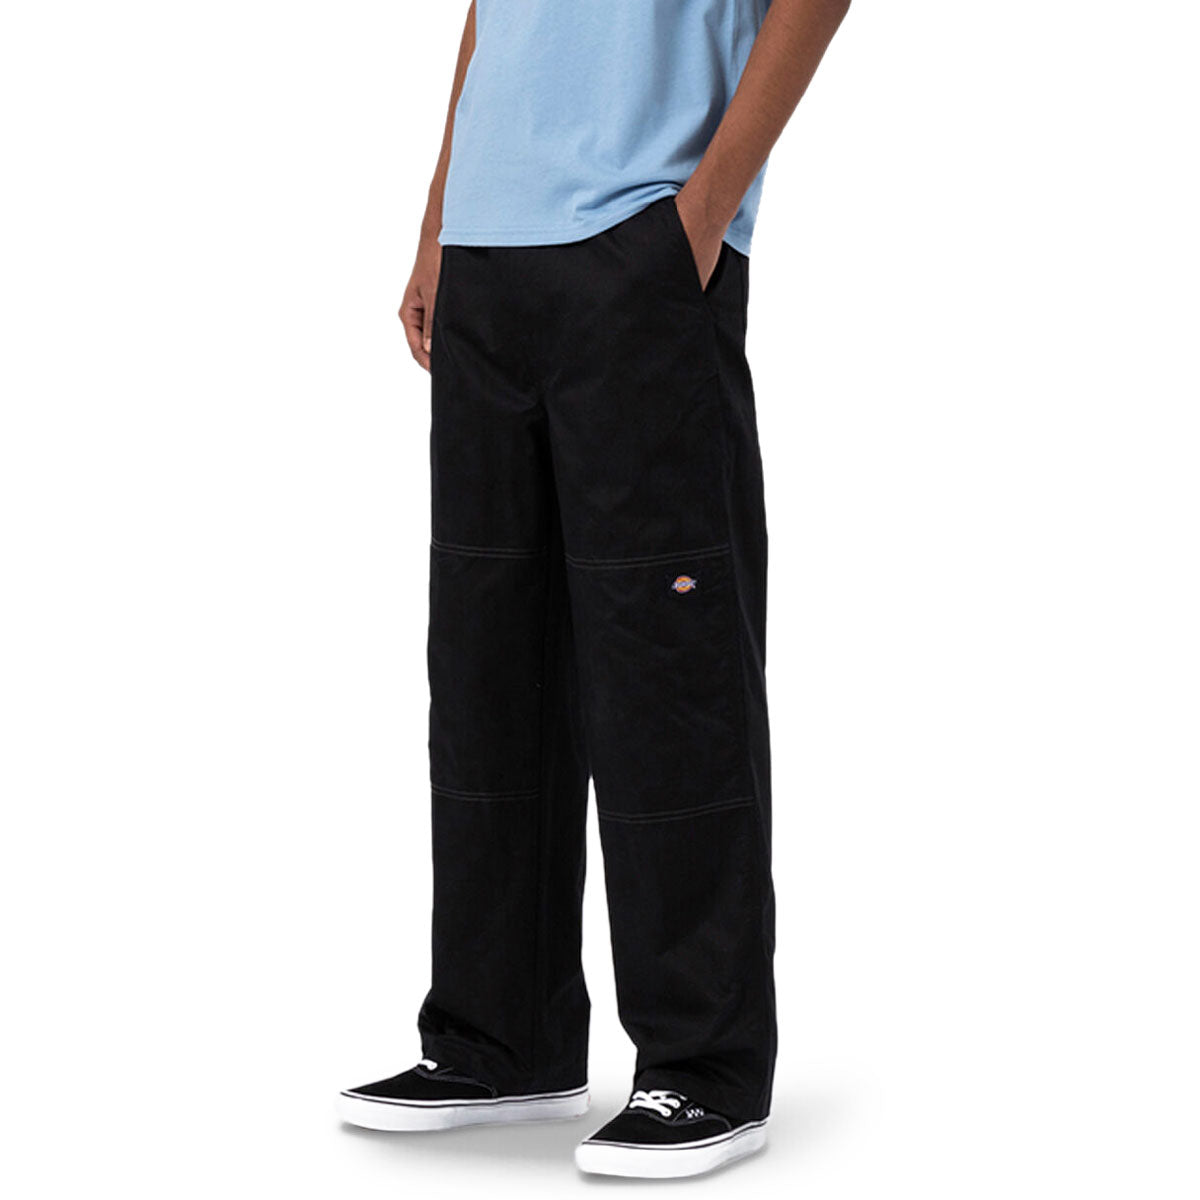 Dickies Summit Relaxed Fit Chef Pants - Black image 4